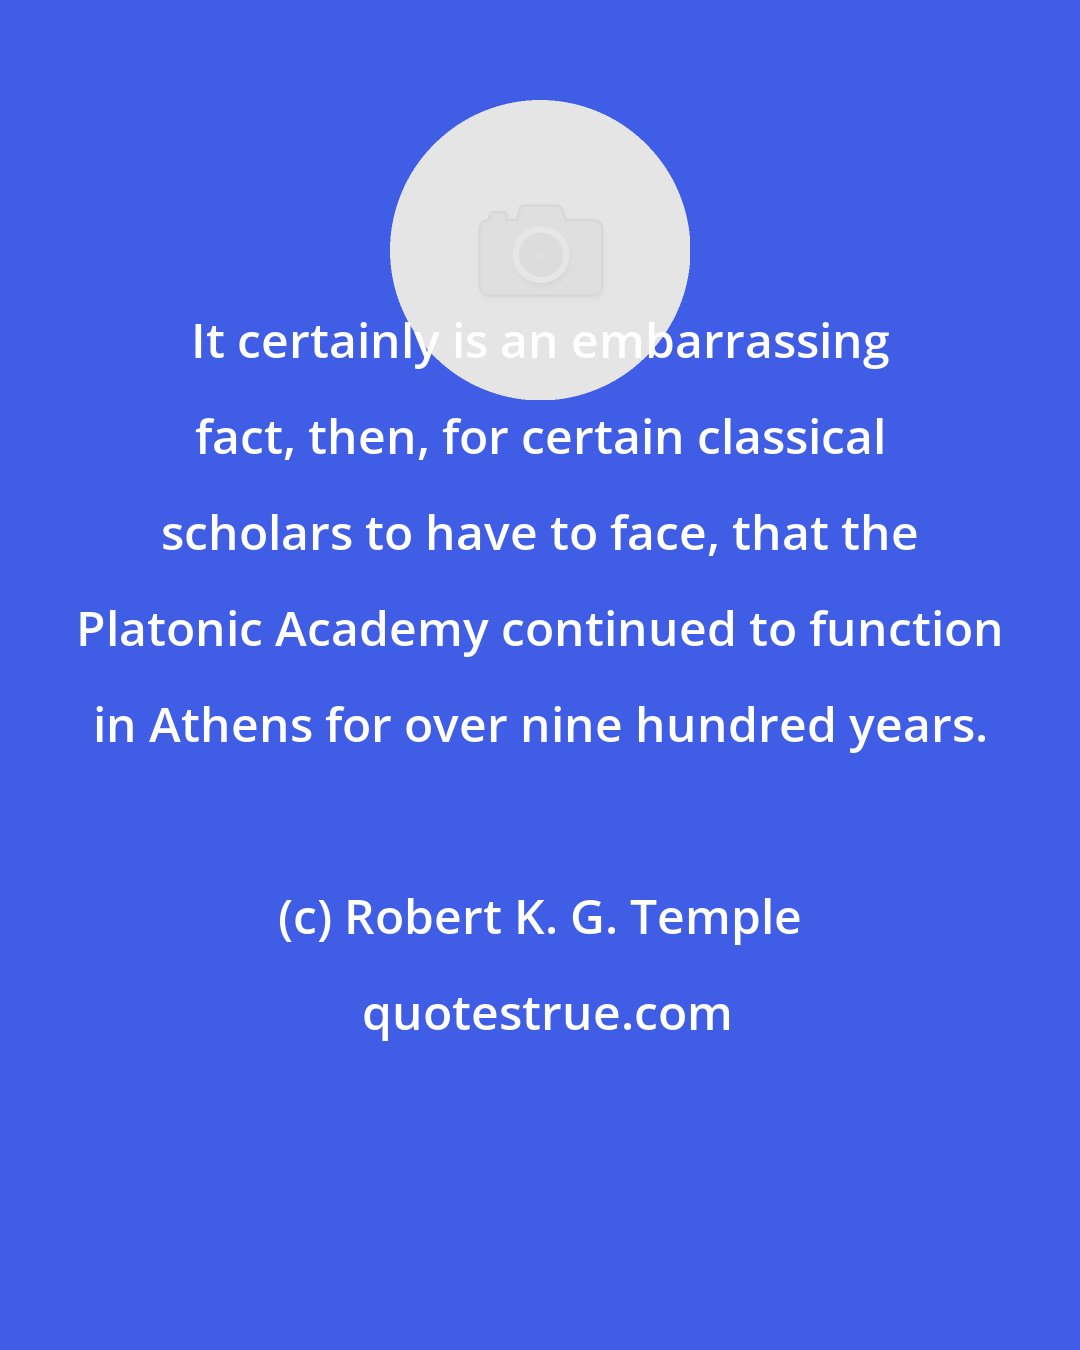 Robert K. G. Temple: It certainly is an embarrassing fact, then, for certain classical scholars to have to face, that the Platonic Academy continued to function in Athens for over nine hundred years.